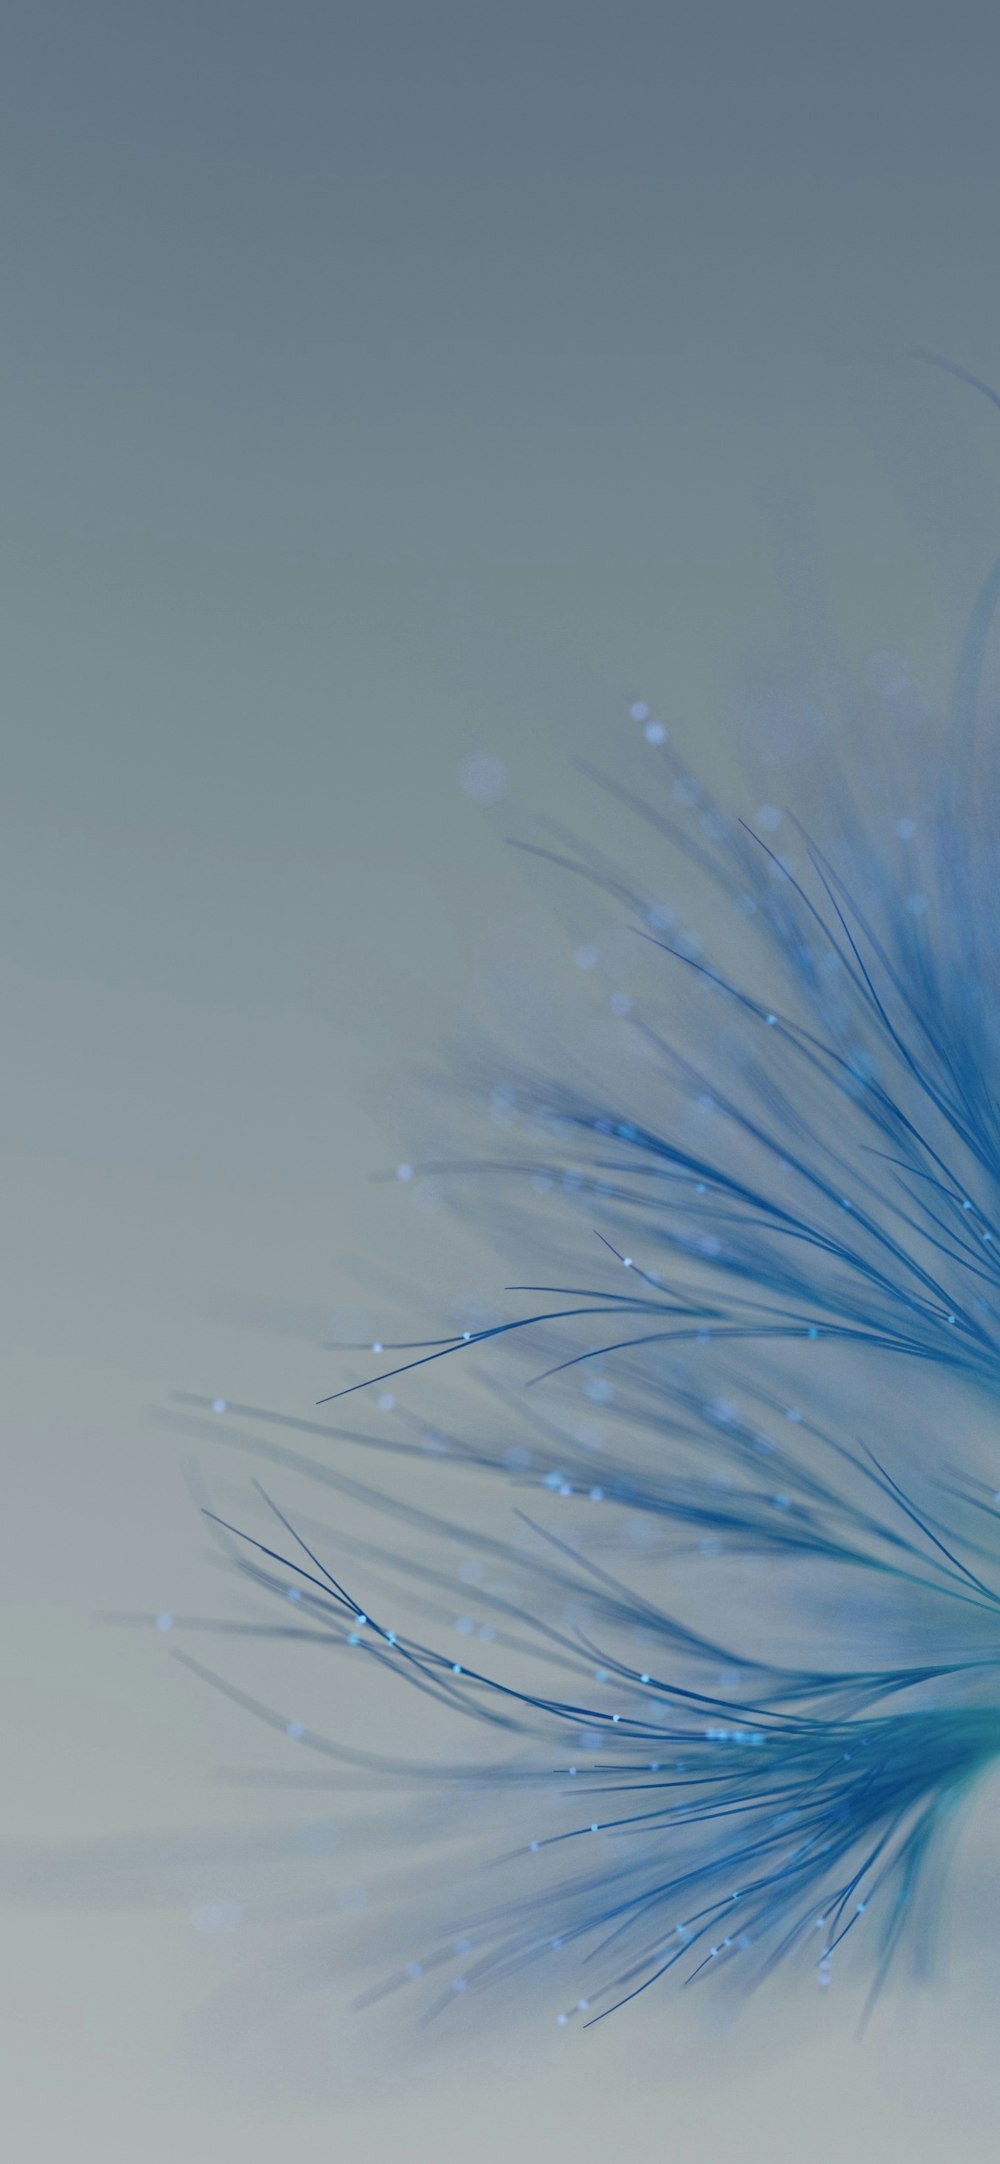 a close up of a blue feather on a white surface